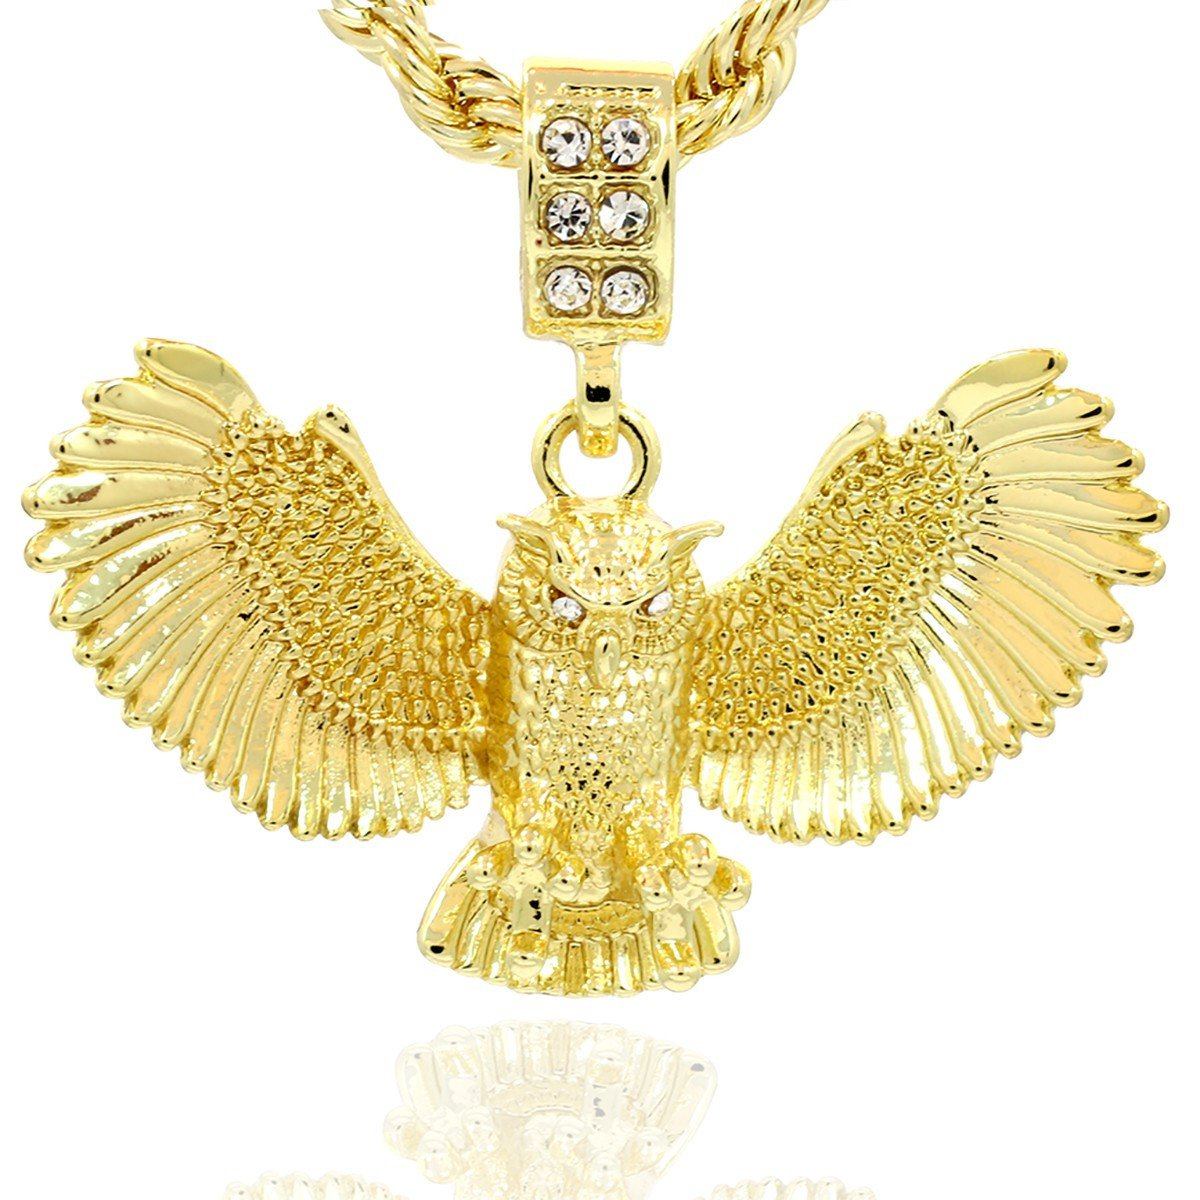 OWL PENDANT WITH GOLD ROPE CHAIN